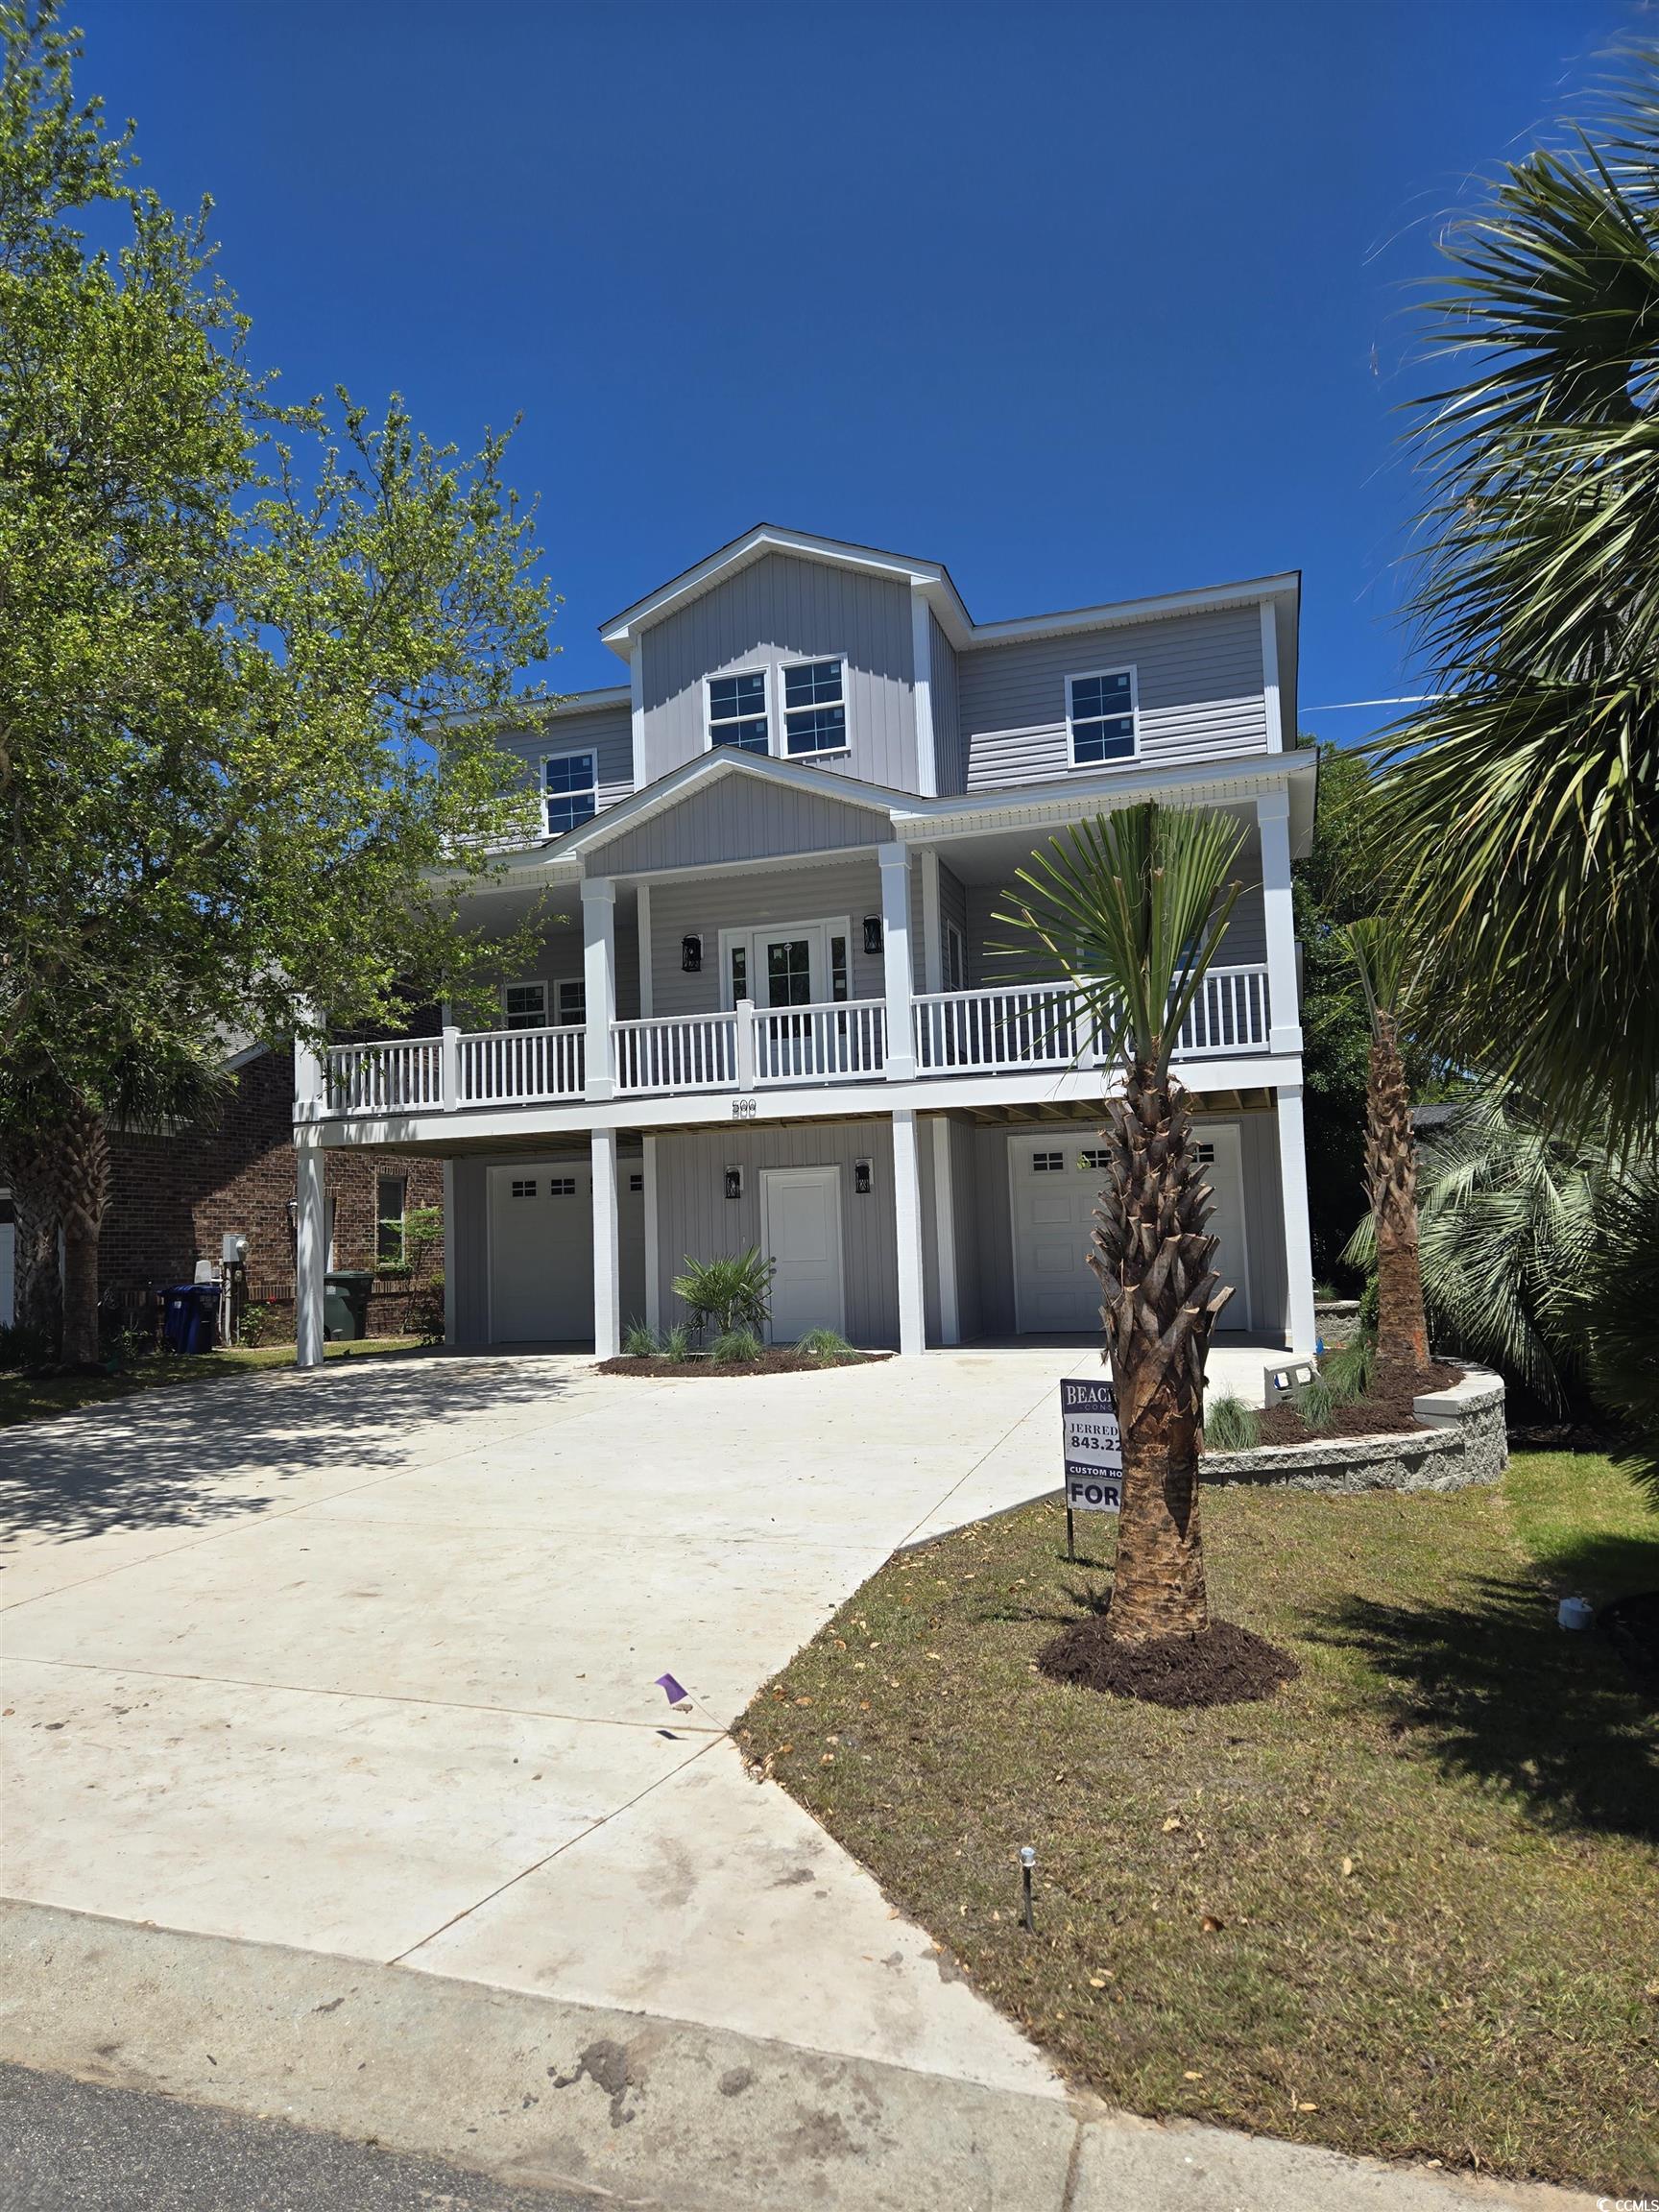 500 5th Ave. S North Myrtle Beach, SC 29582